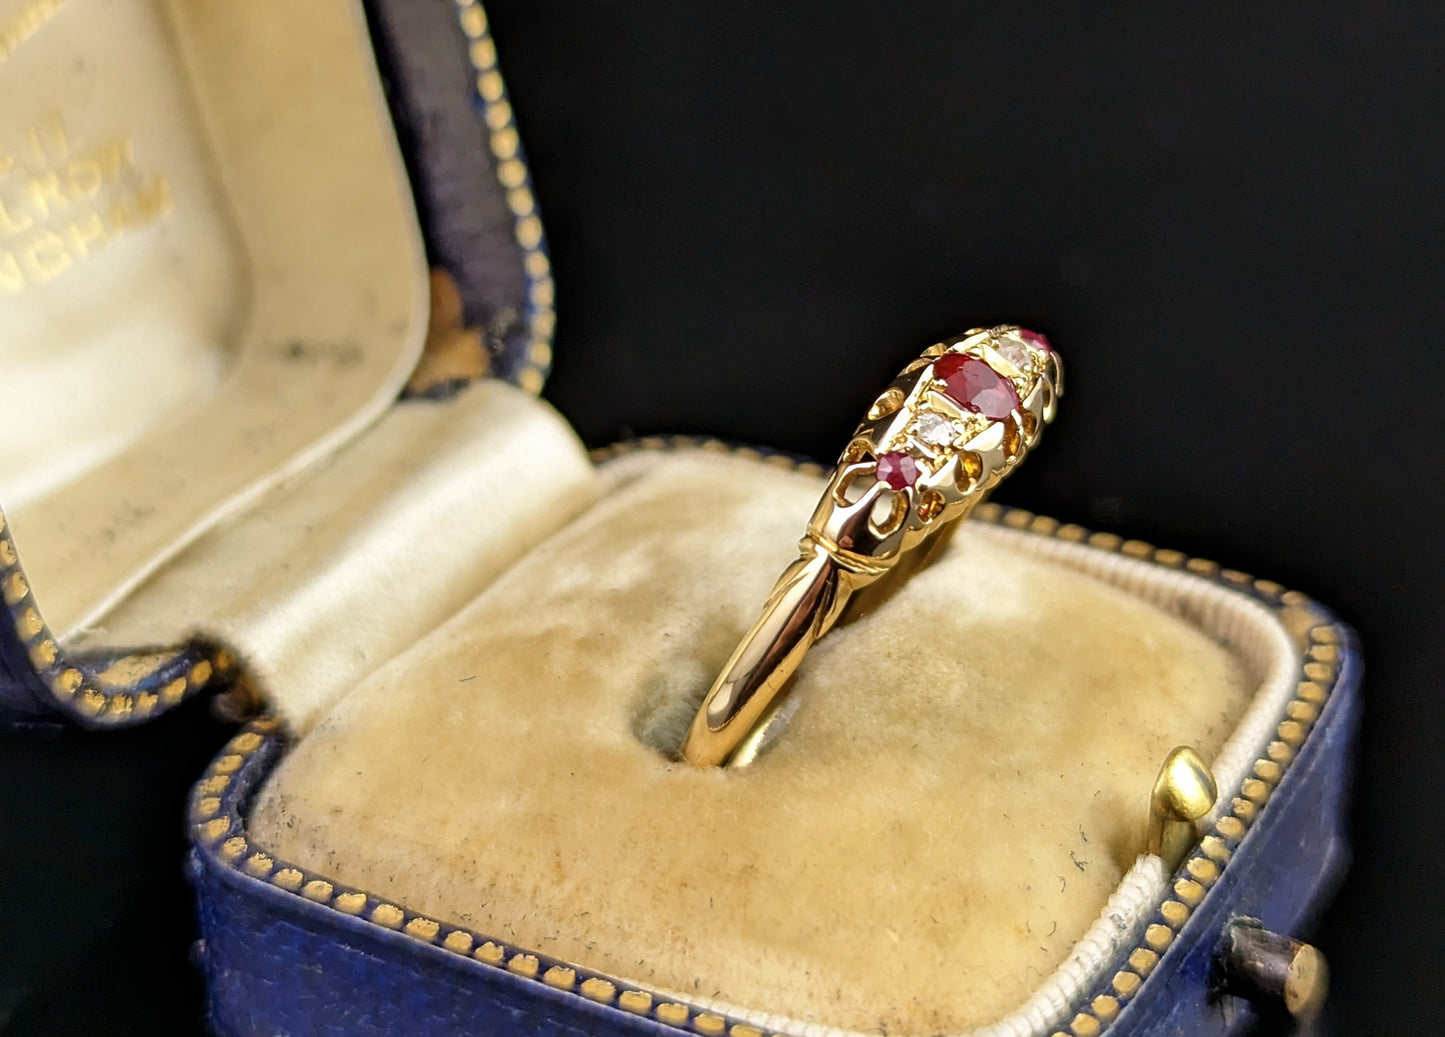 Antique Victorian Ruby and Diamond ring, 18ct yellow gold